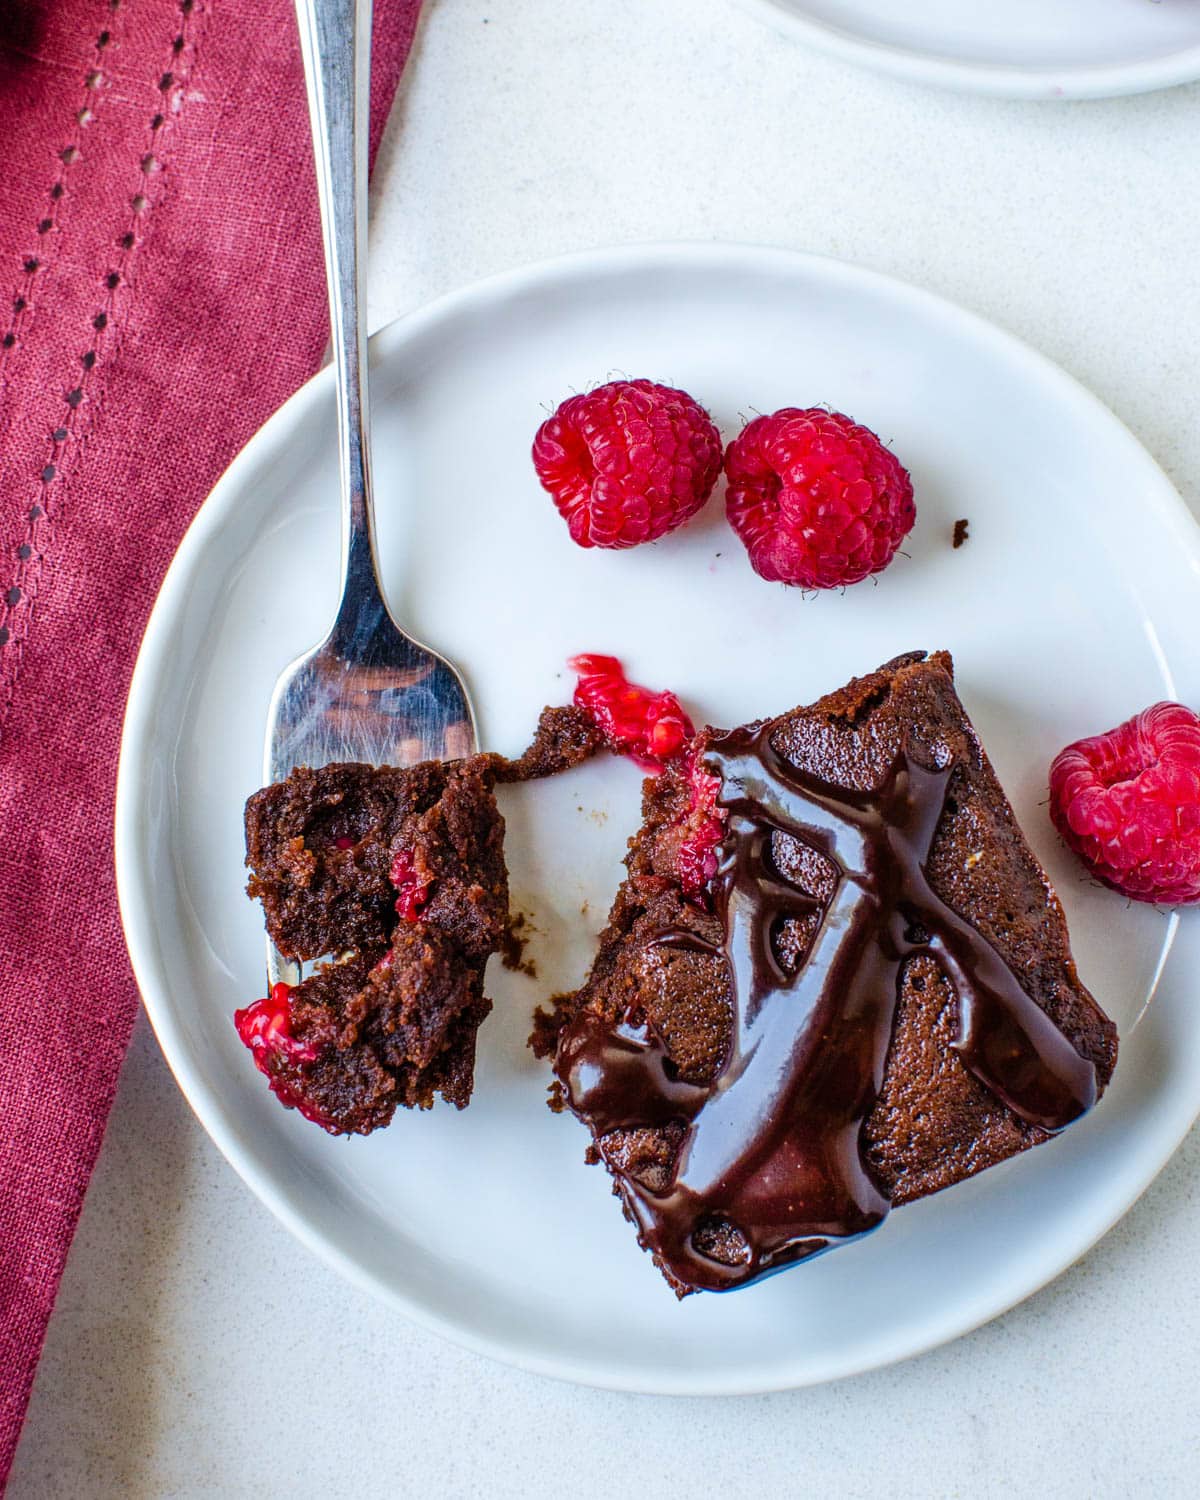 Cutting into the fudgy raspberry brownie on a plate.